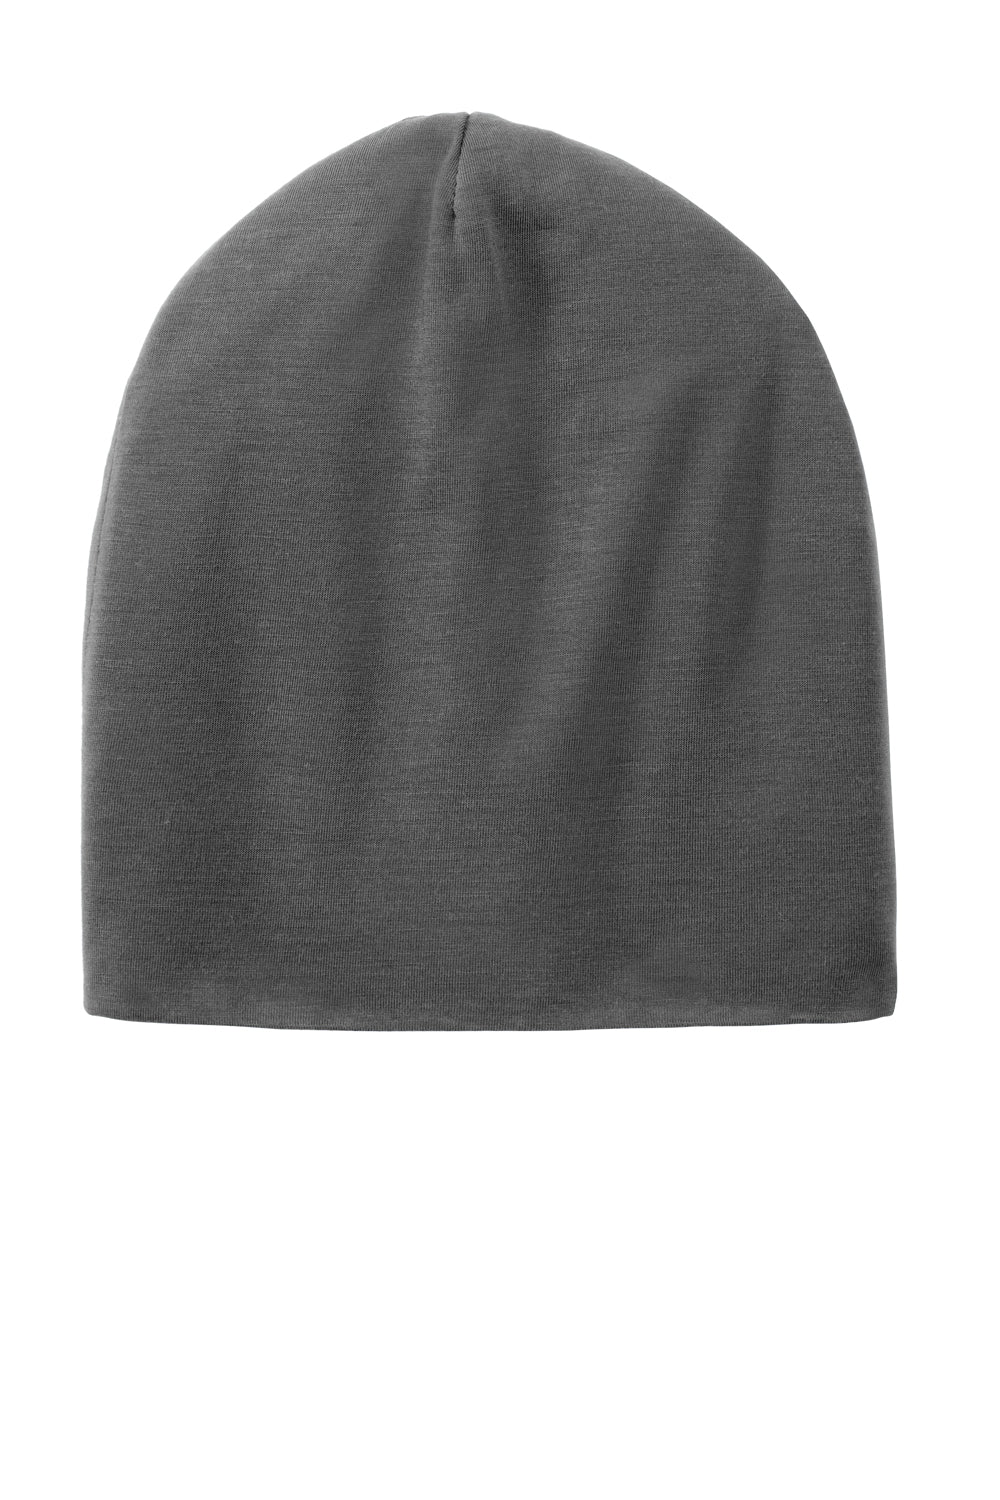 Sport-Tek STC35 PosiCharge Competitor Jersey Knit Slouch Beanie Dark Smoke Grey Front